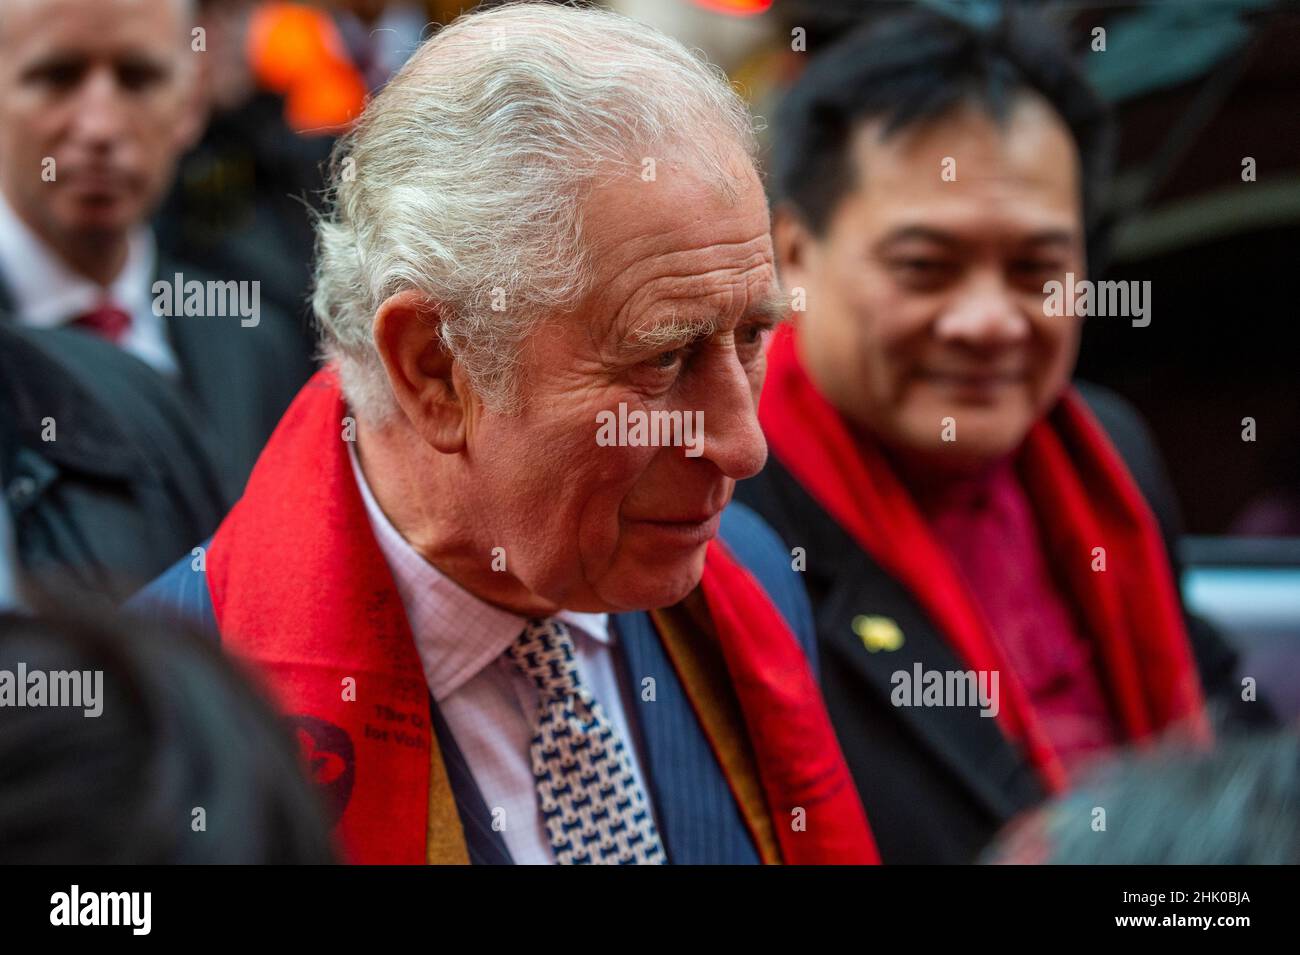 London, UK.  1 February 2022. The Prince of Wales meets crowds in Chinatown during a visit to celebrate the Lunar New Year, the Year of the Tiger.  Credit: Stephen Chung / Alamy Live News Stock Photo